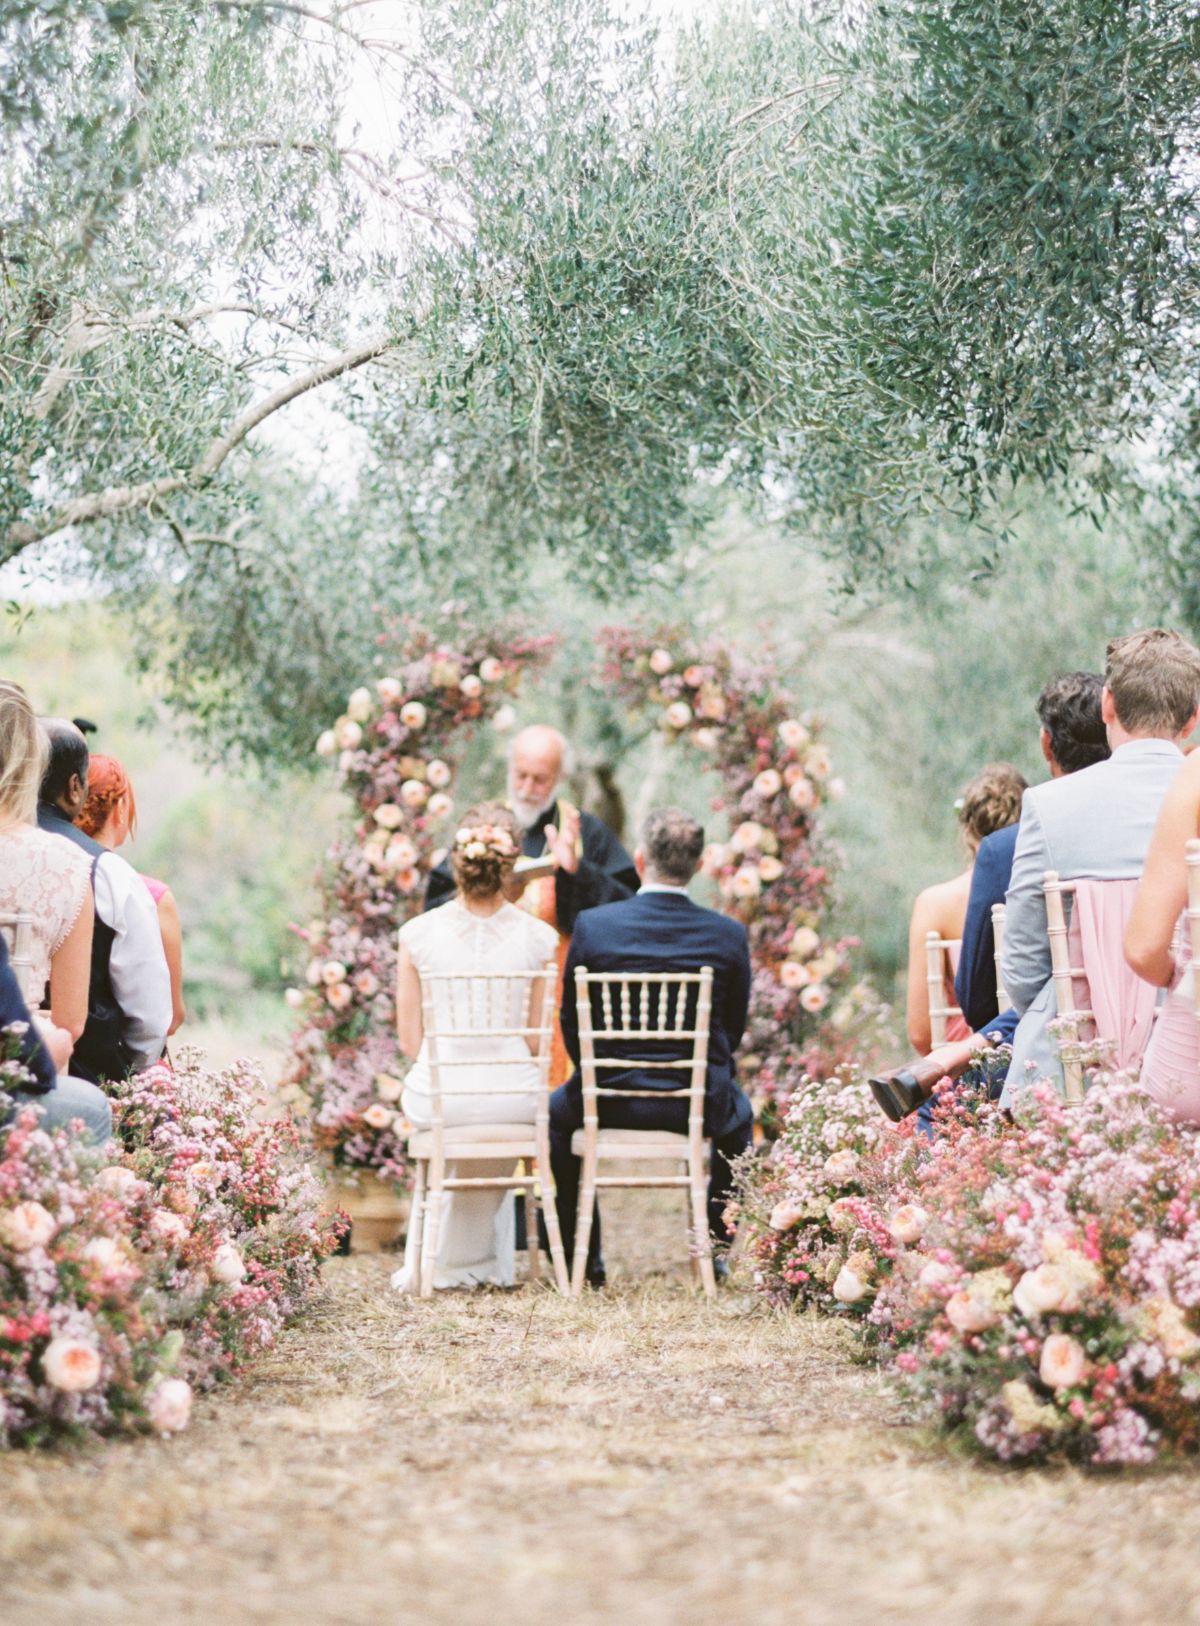 Why a wedding planner is so important for a destination wedding